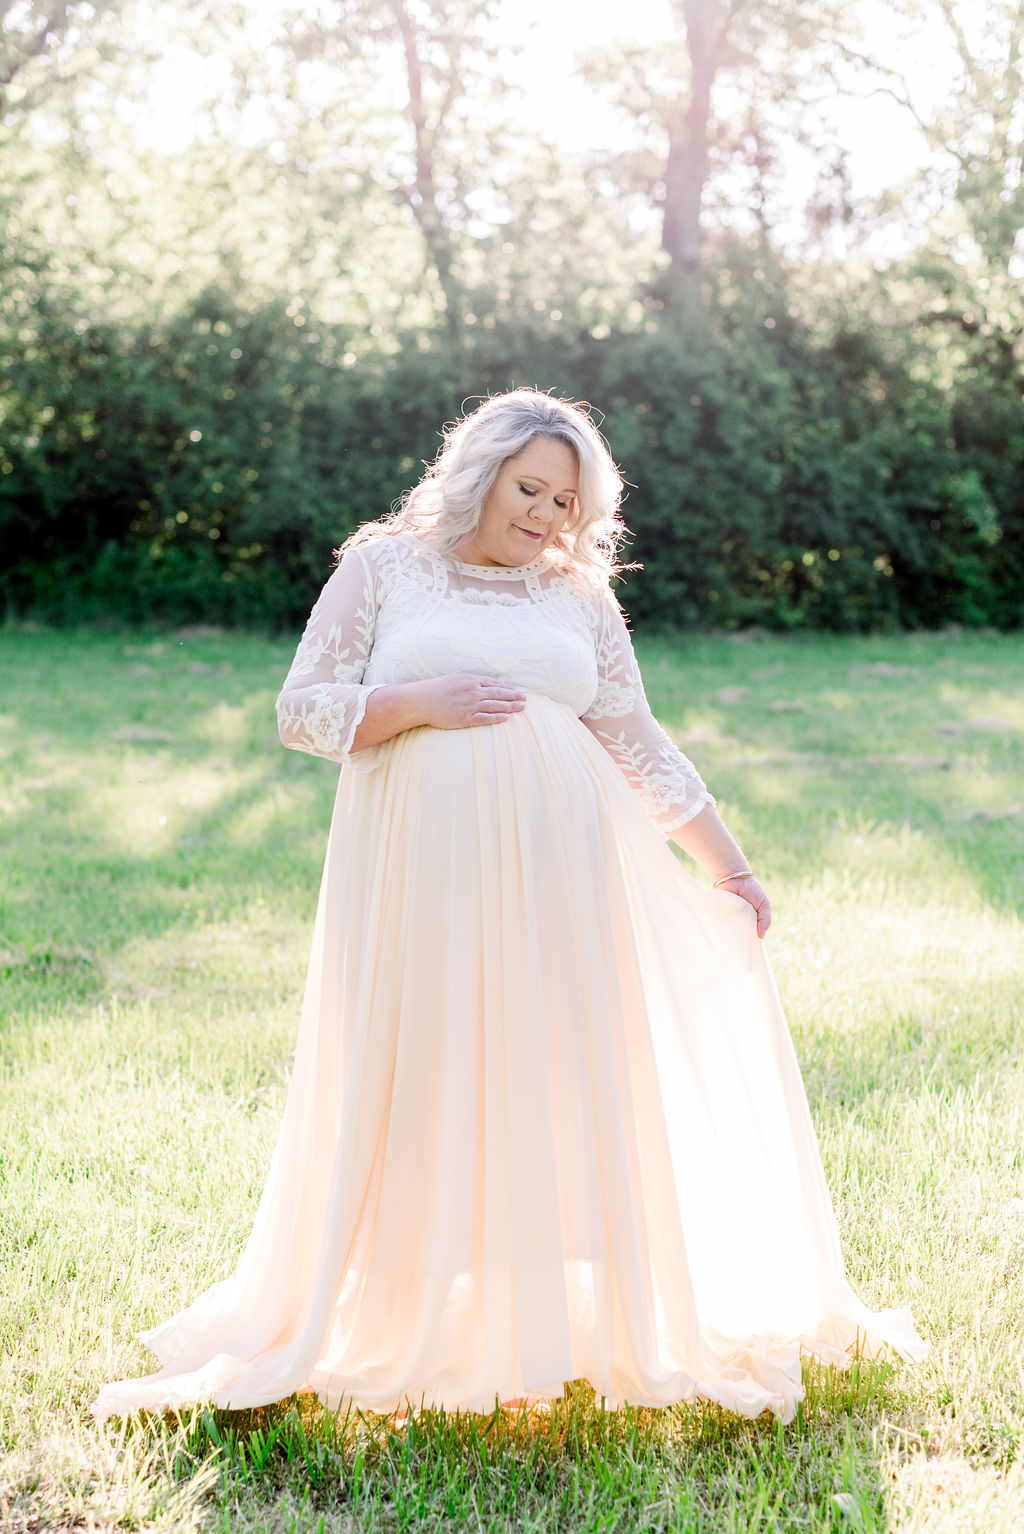 Spring Smith Park Maternity Session by Rebecca Denton Photography featured on Nashville Baby Guide